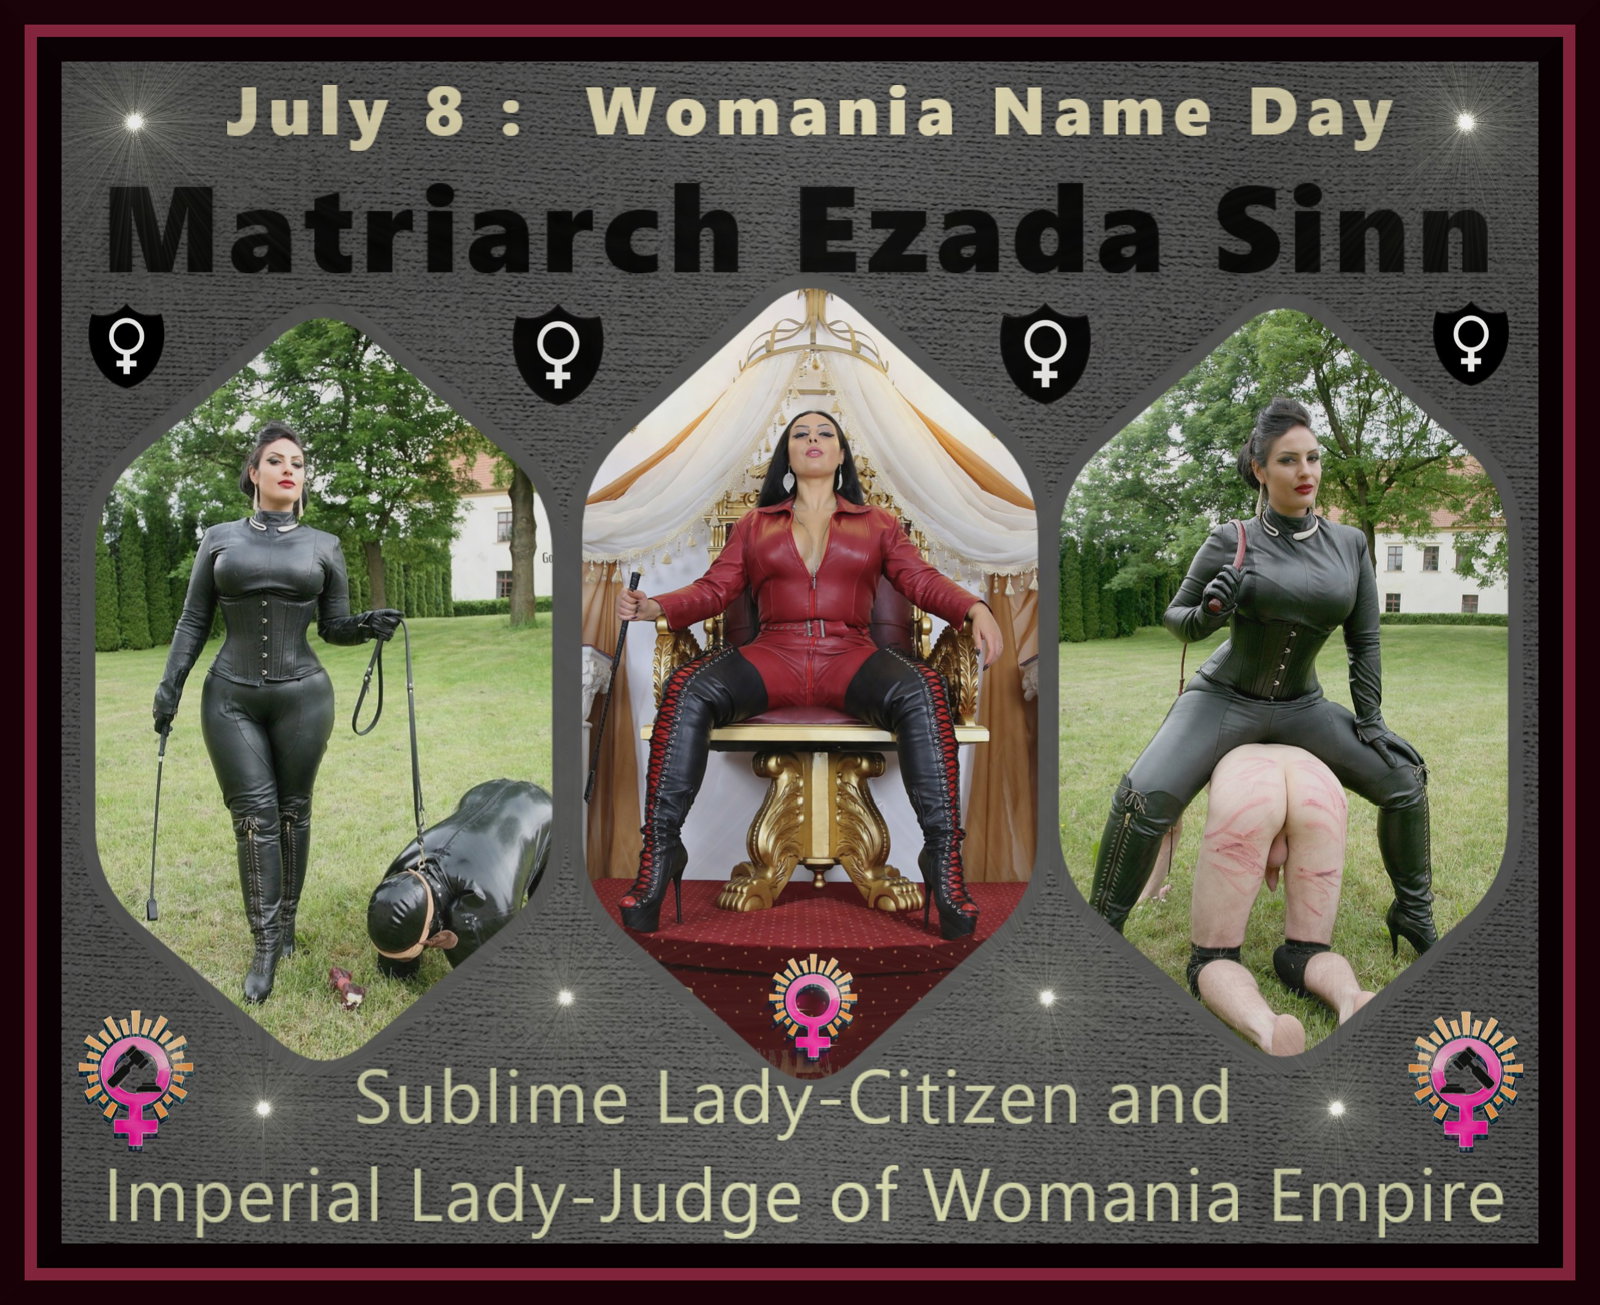 Photo by sluga0201 with the username @sluga0201,  July 7, 2020 at 2:50 PM. The post is about the topic Praising the Power of Matriarch Ezada Sinn and the text says 'BETTER NOT FORGET! 8th of July is #WomaniaNameDay of powerful Matriarch @Ezada Sinn, one of the Highest Representatives of true #FemaleSupremacy and The Imperial Lady-Judge of #WomaniaEmpire! Submit yourself to Her Power to will find happiness and..'